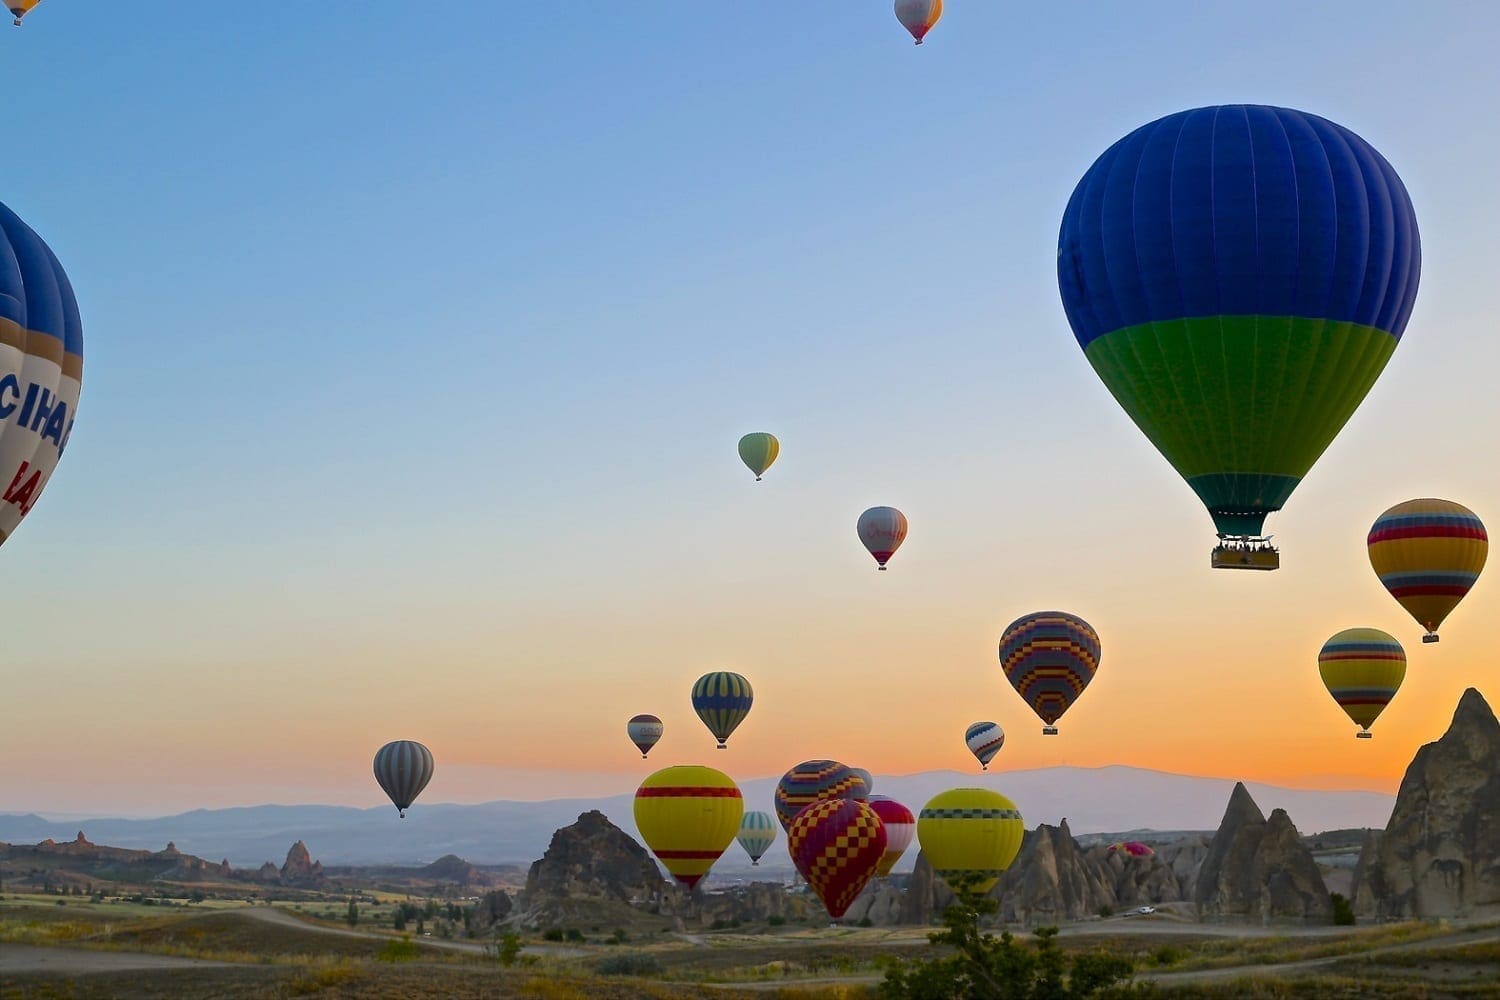 Hot air balloons at sunrise over Turkey, photo credit: Pxhere